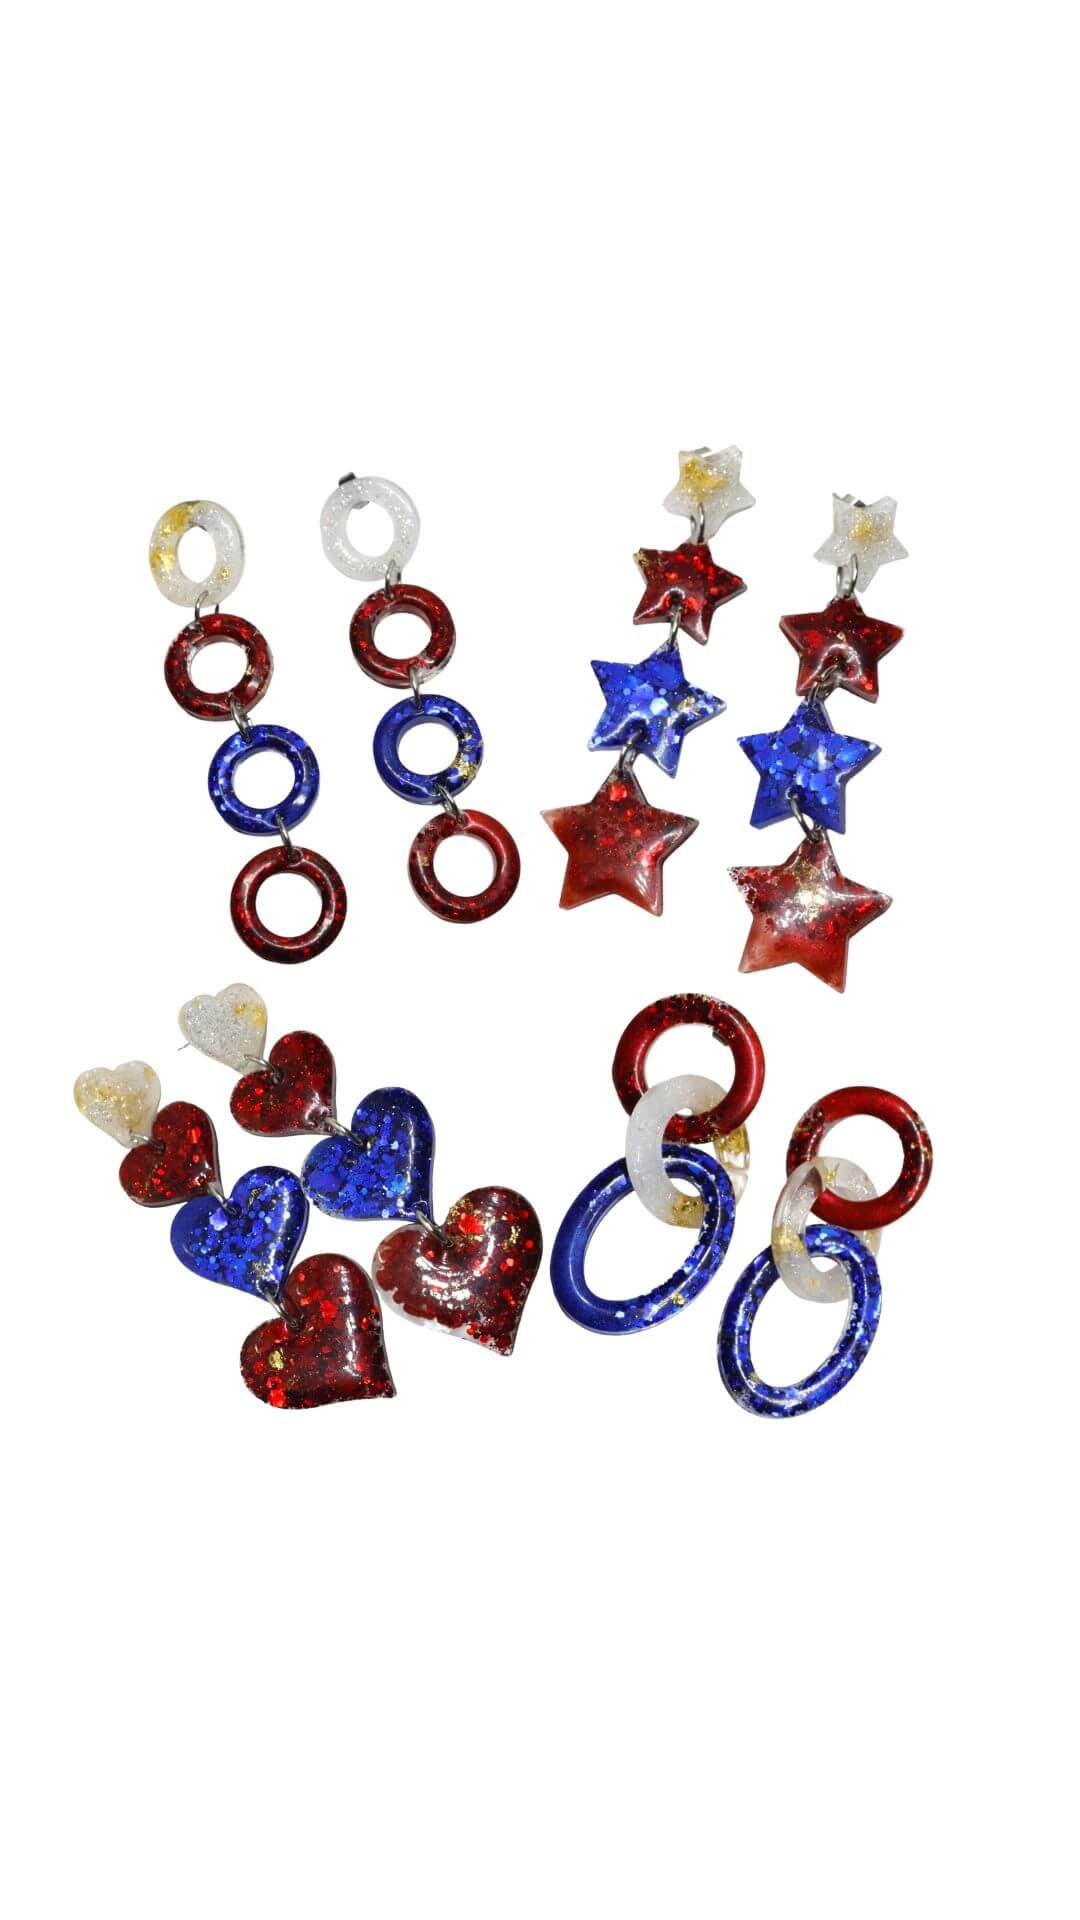 Patriotic-Jewelry-Collection---red-white-and-blue-earrings---hypoallergenic-earrings---long-statement-earrings---kaleidoscopes-and-polka-dots